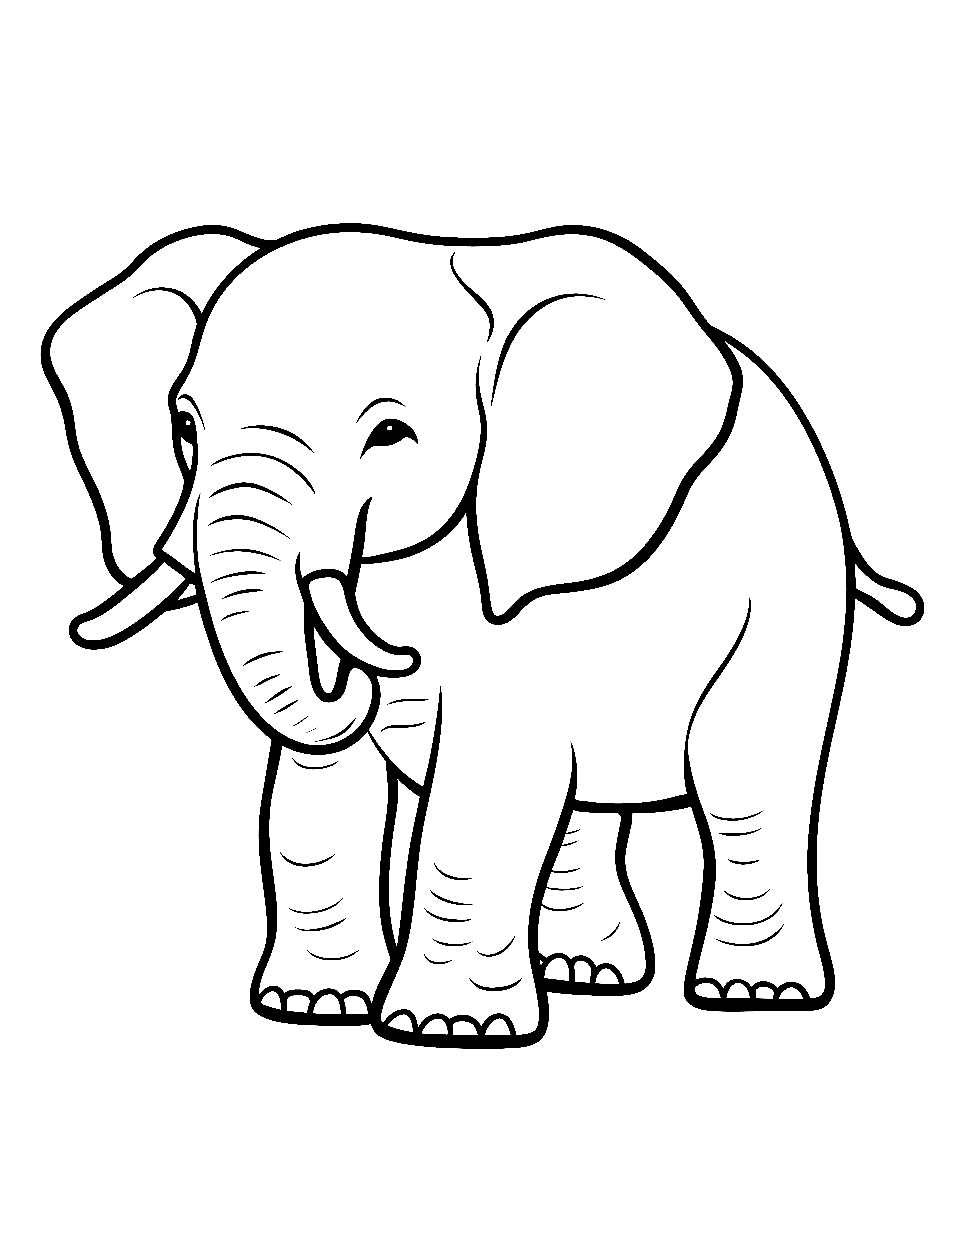 चित्र:Indian elephant (PSF).png - विकिपीडिया